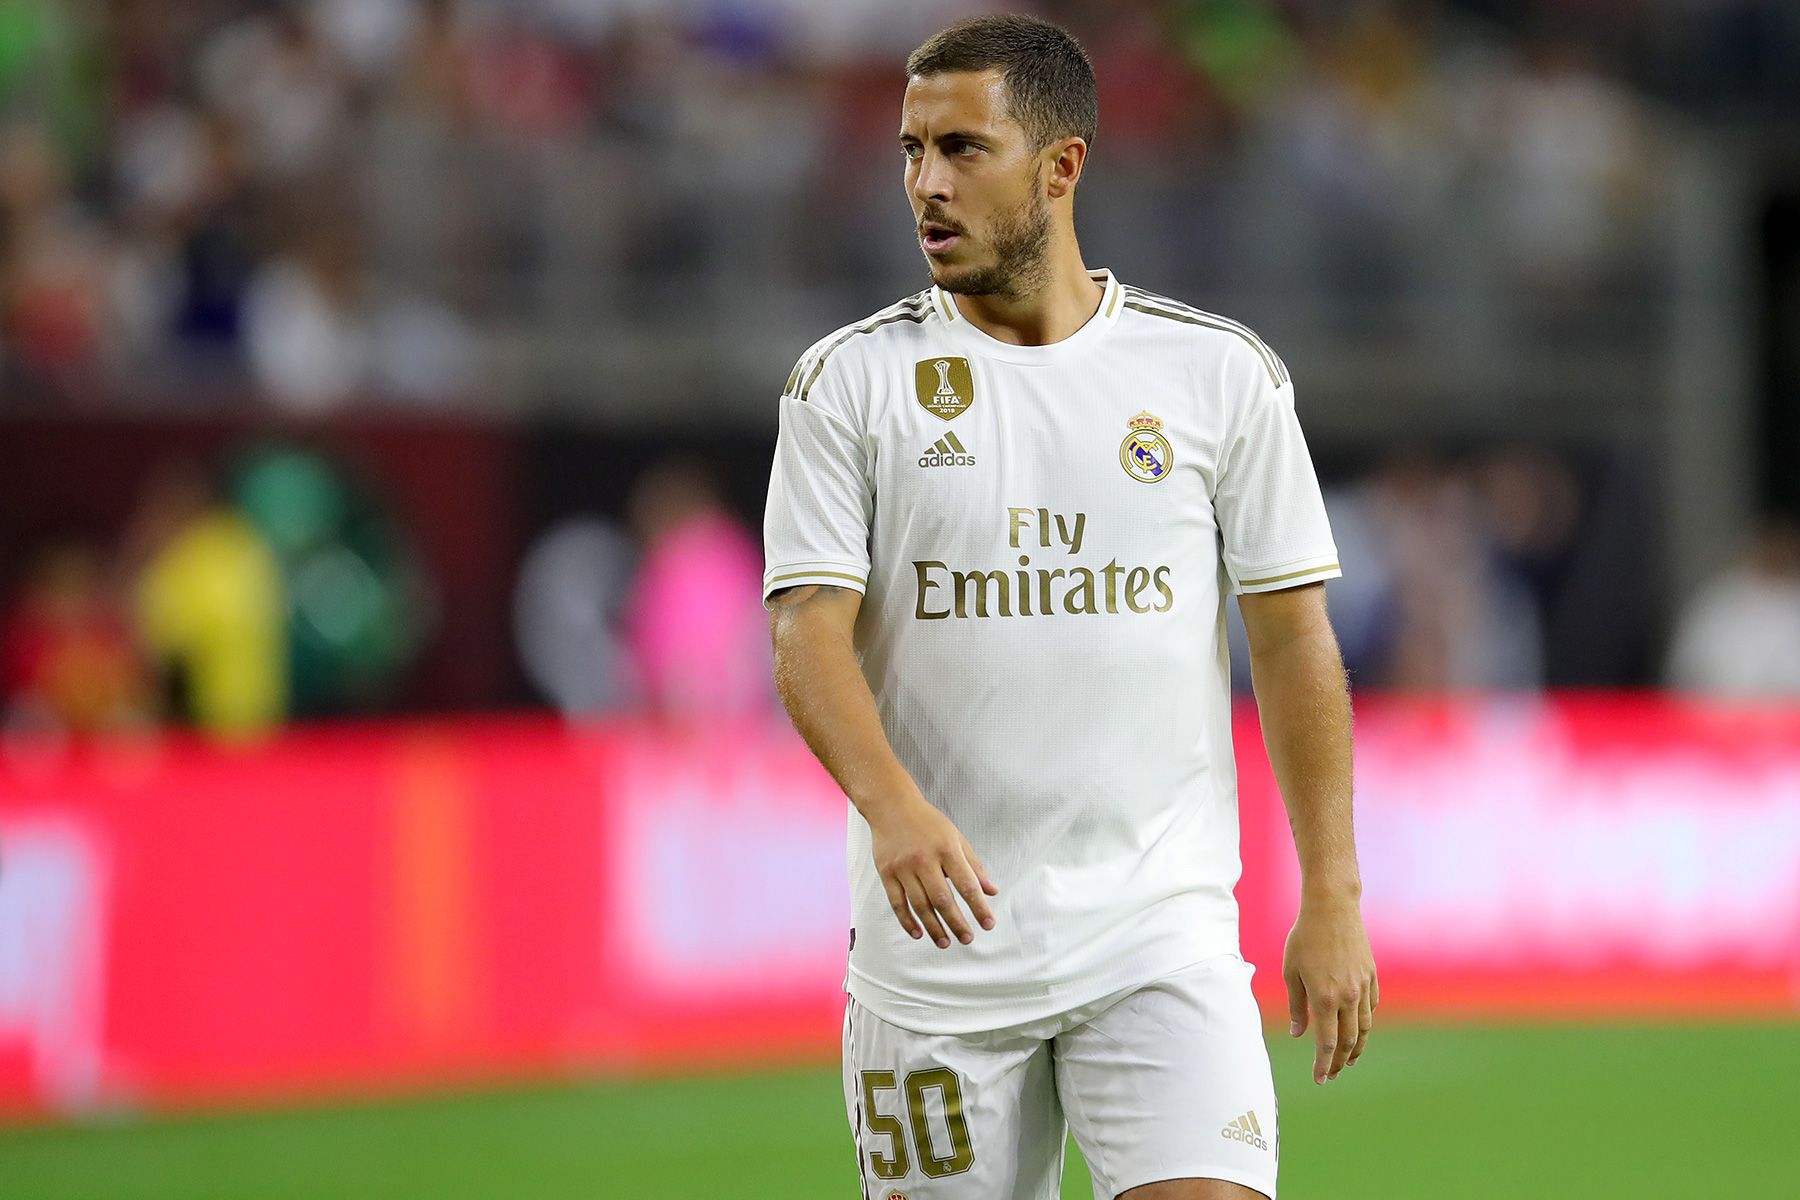 Transfer News: Chelsea might not be in a position to make a move for Eden Hazard .